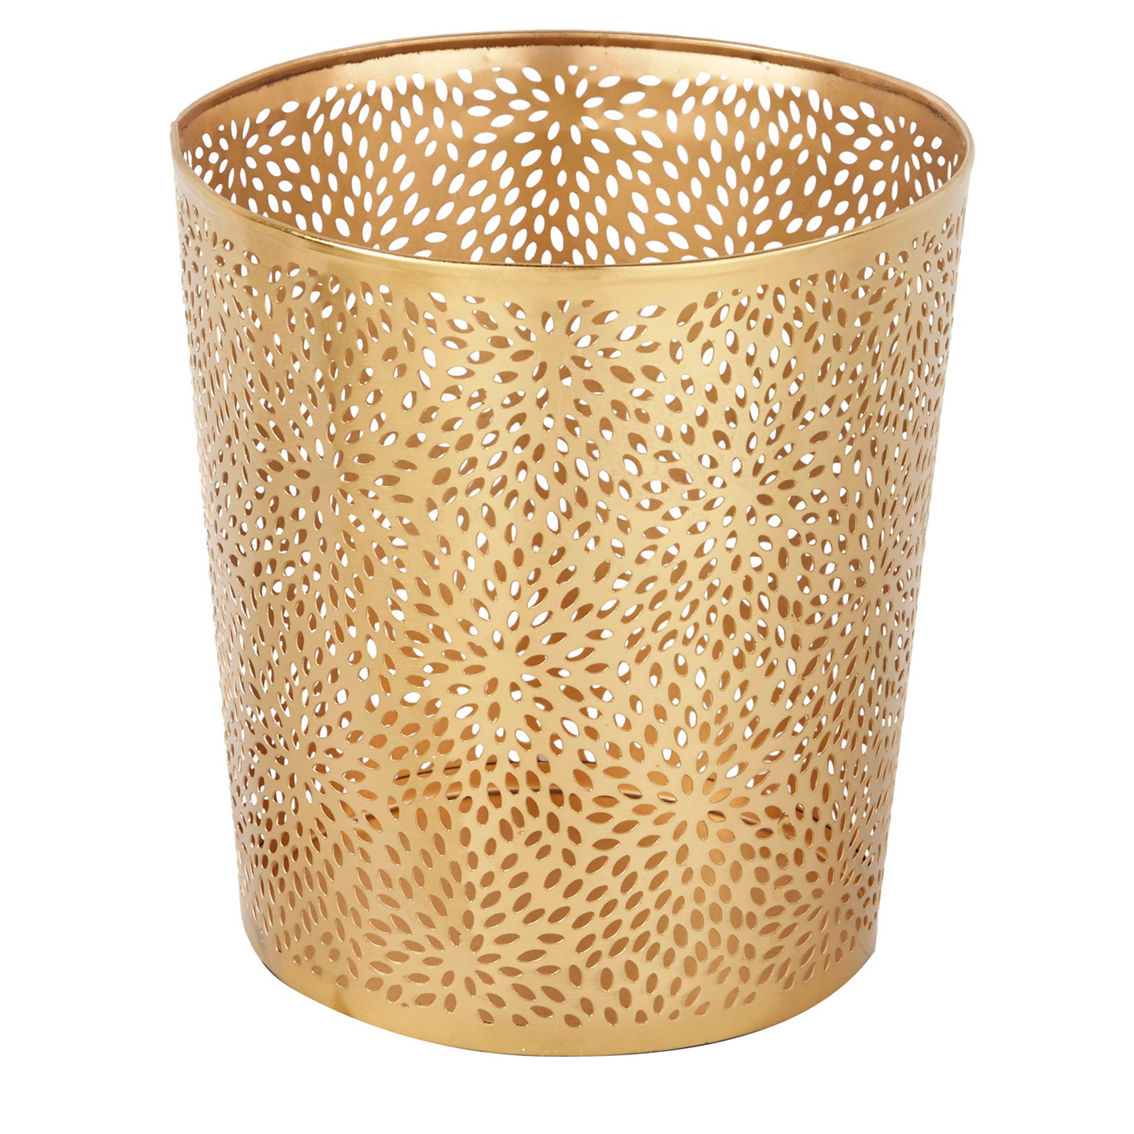 CosmoLiving by Cosmopolitan Glam Gold Metal Small Waste Bin - Image 5 of 5